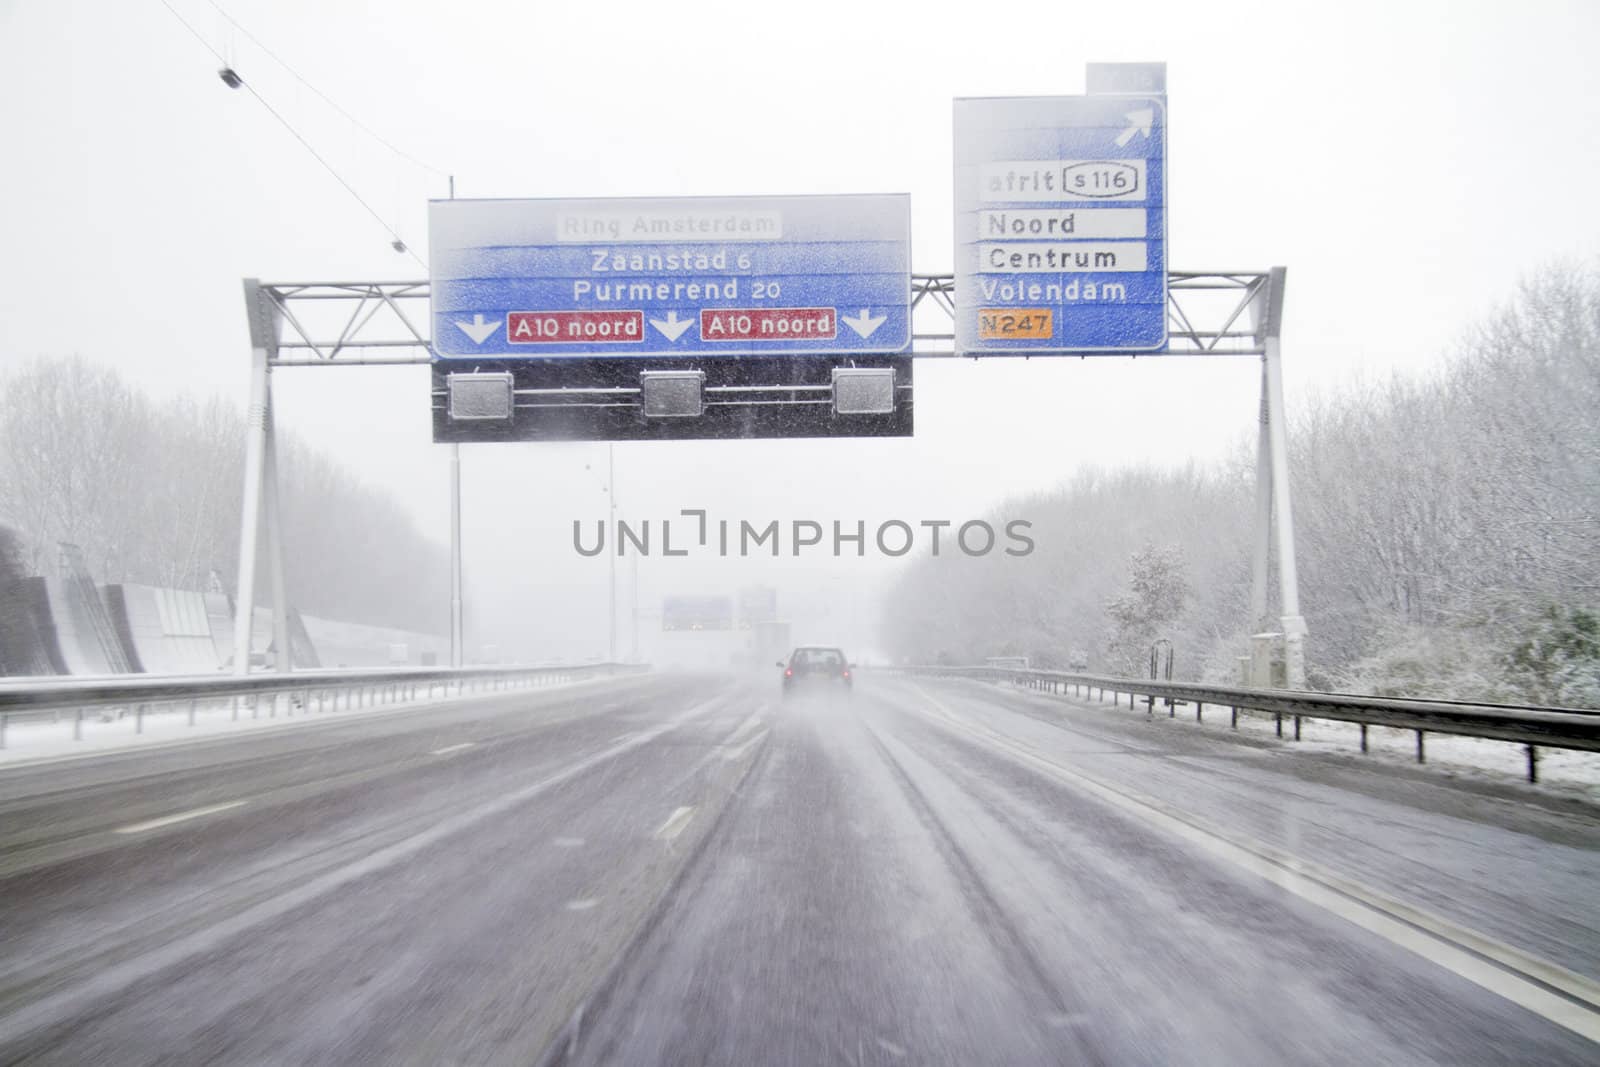 Driving in a snowstorm on the highway near Amsterdam in the Netherlands